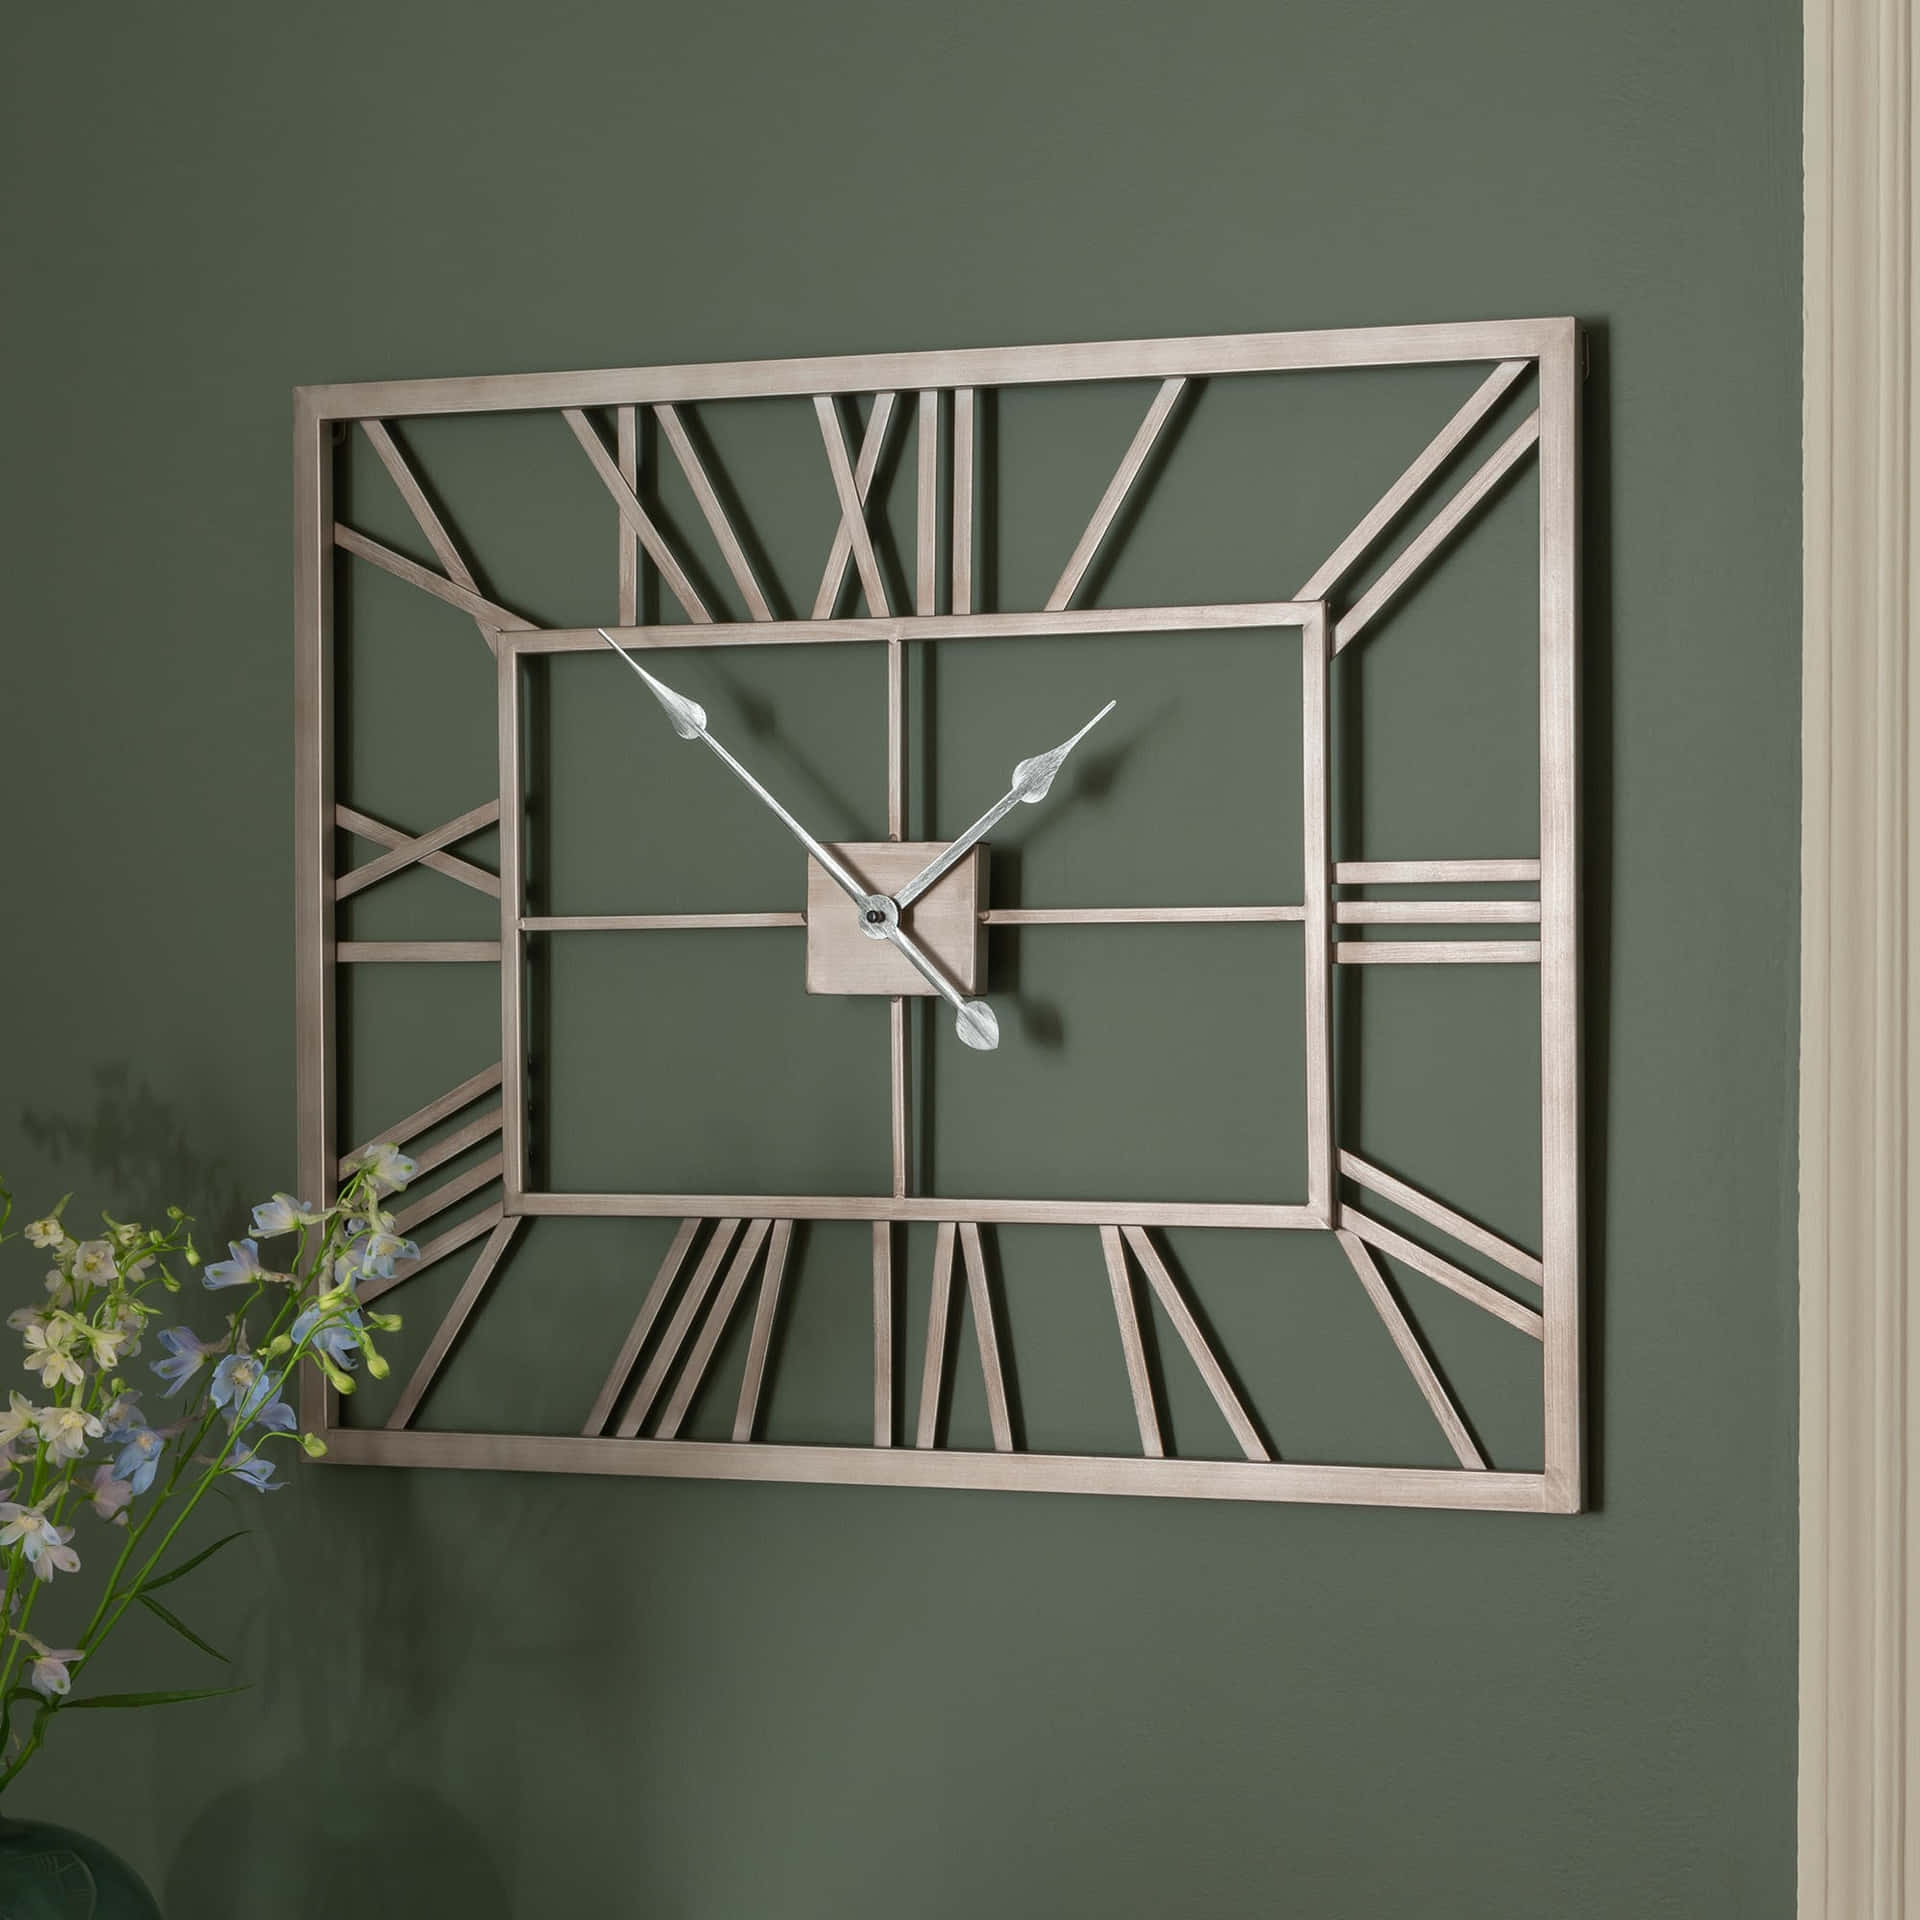 A Wall Clock With Roman Numerals On It